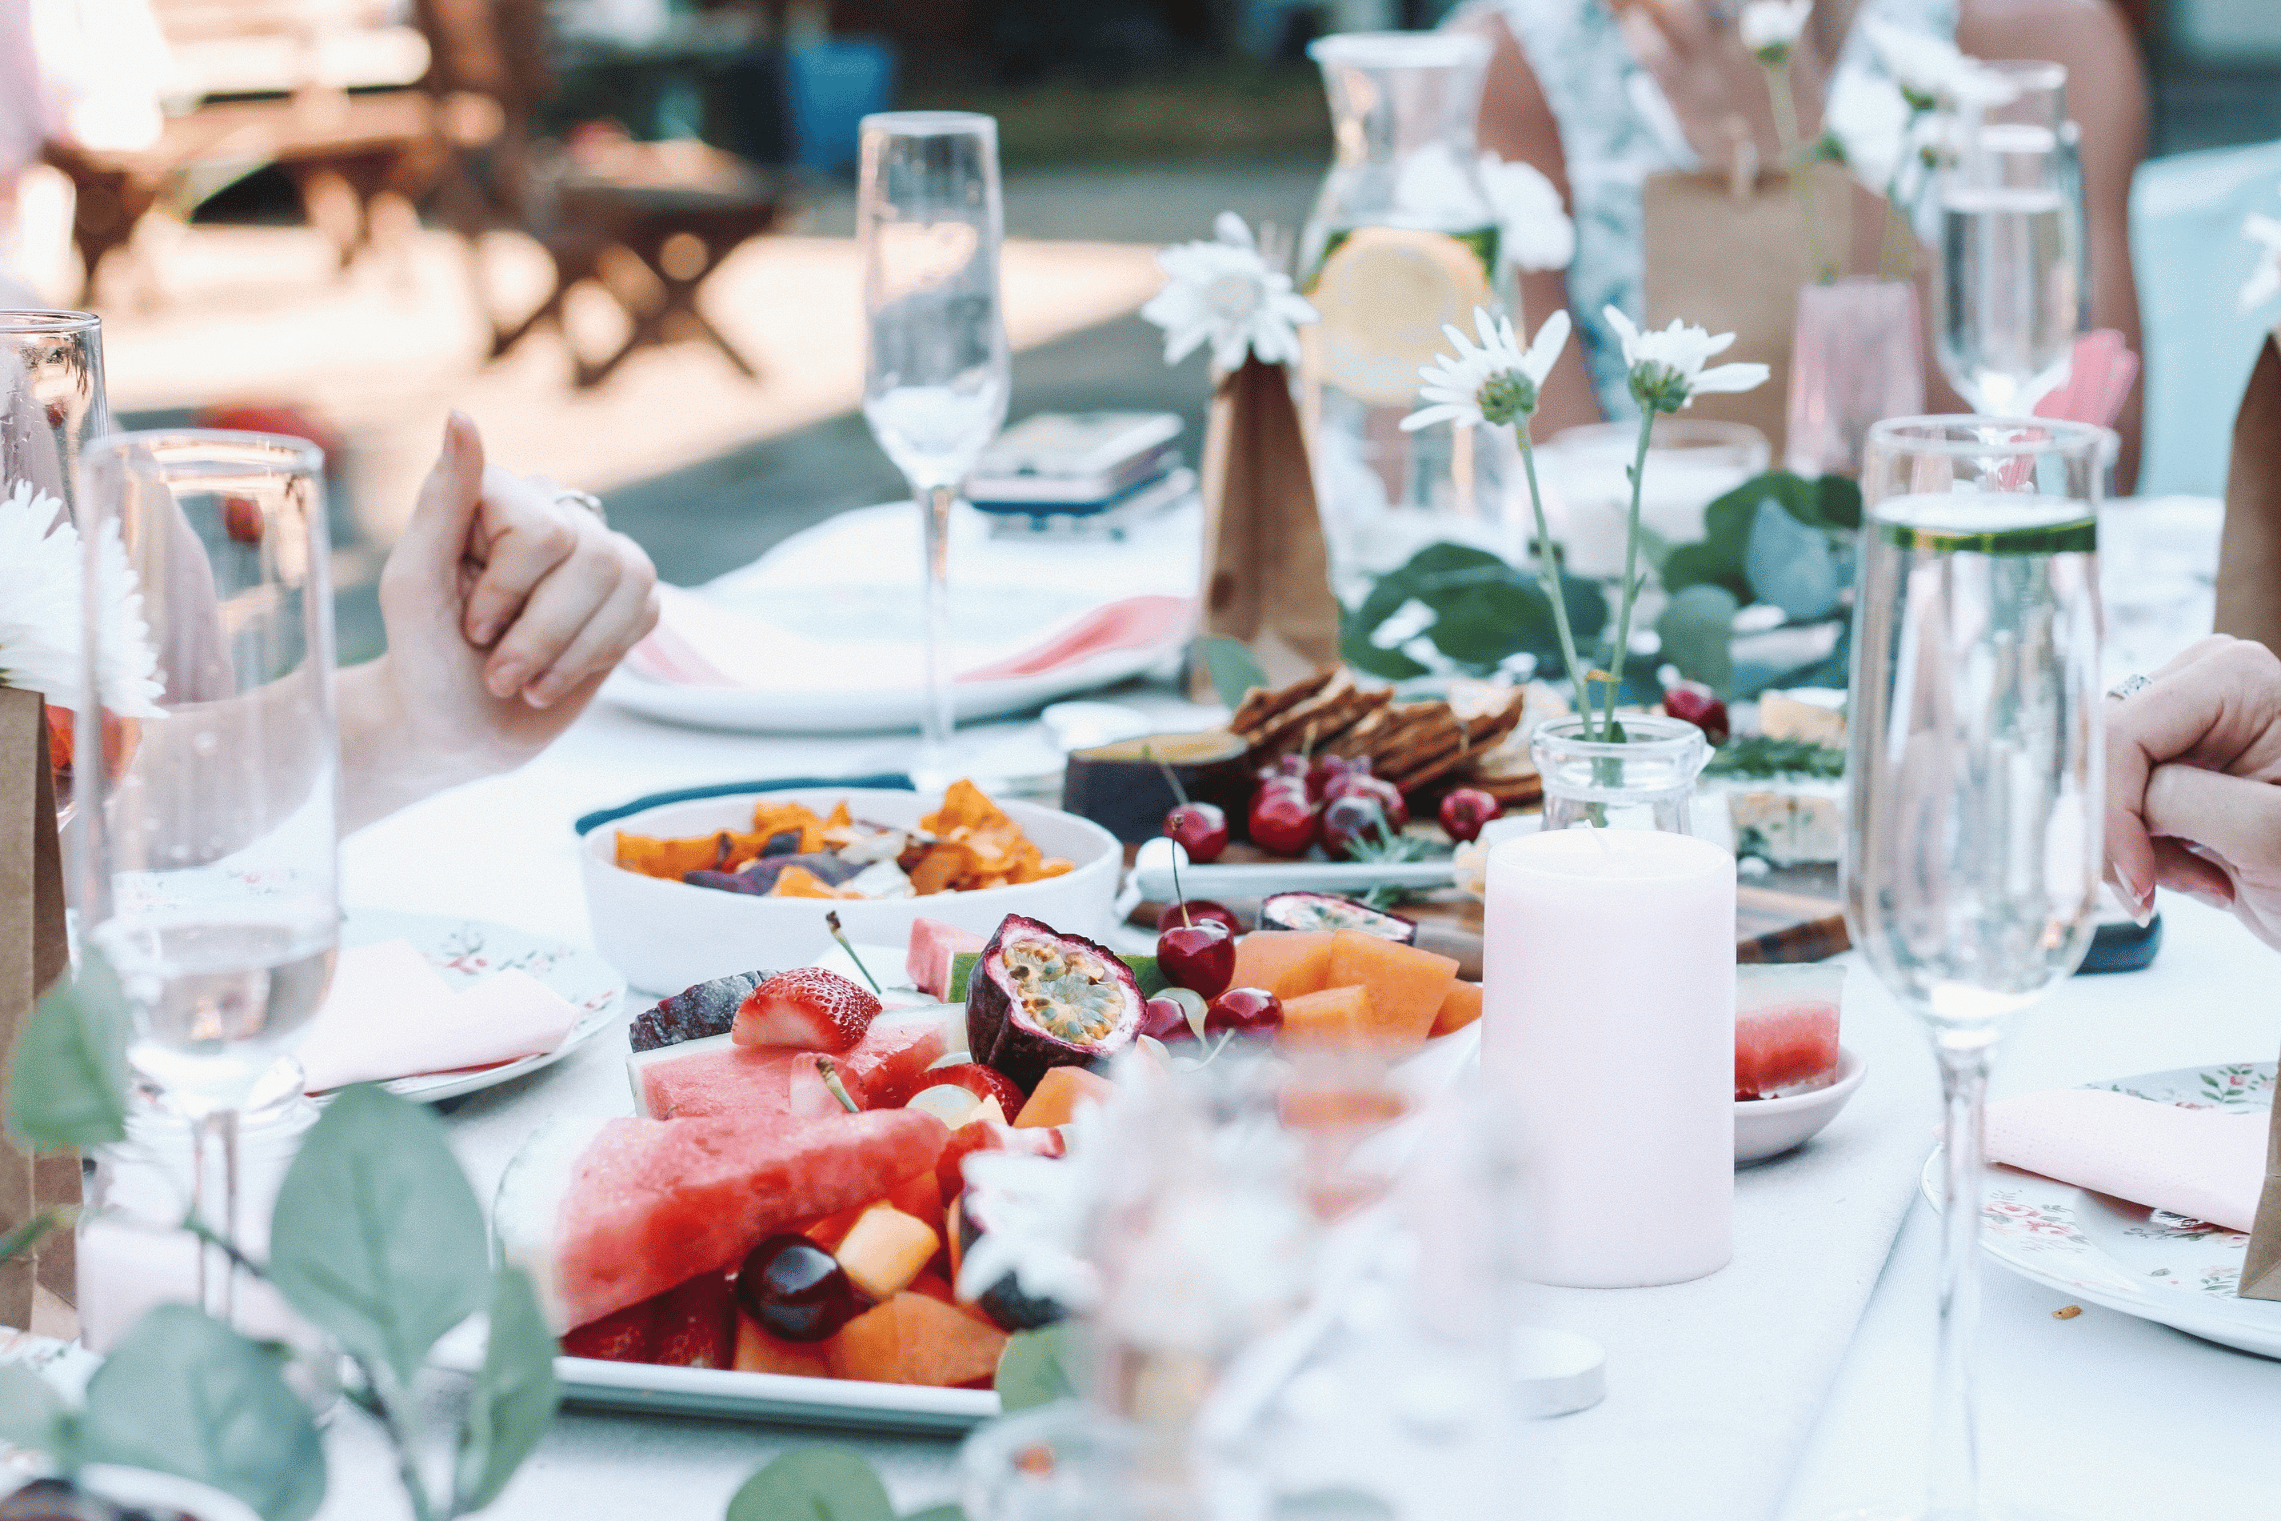 an image of a decorated dinner table outside